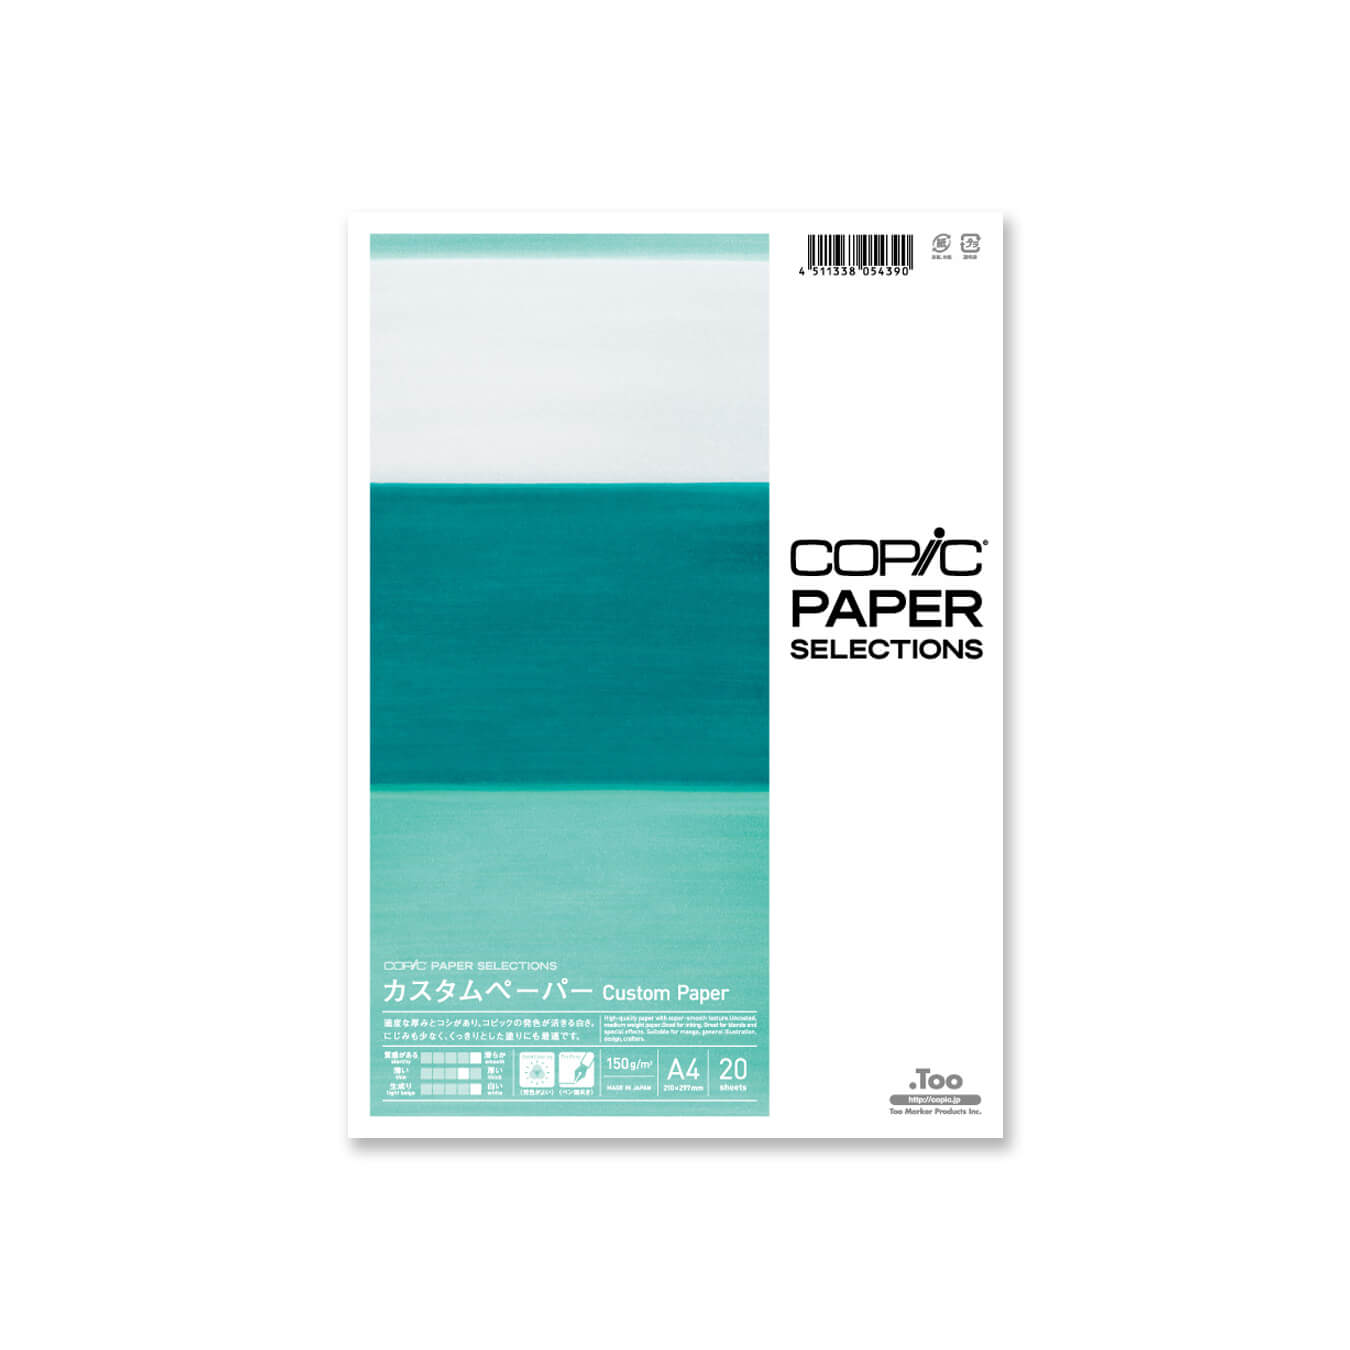 70 lb Copic paper in the Rare ACEO size 3.5x2.5 Art Cards Pack of 10 